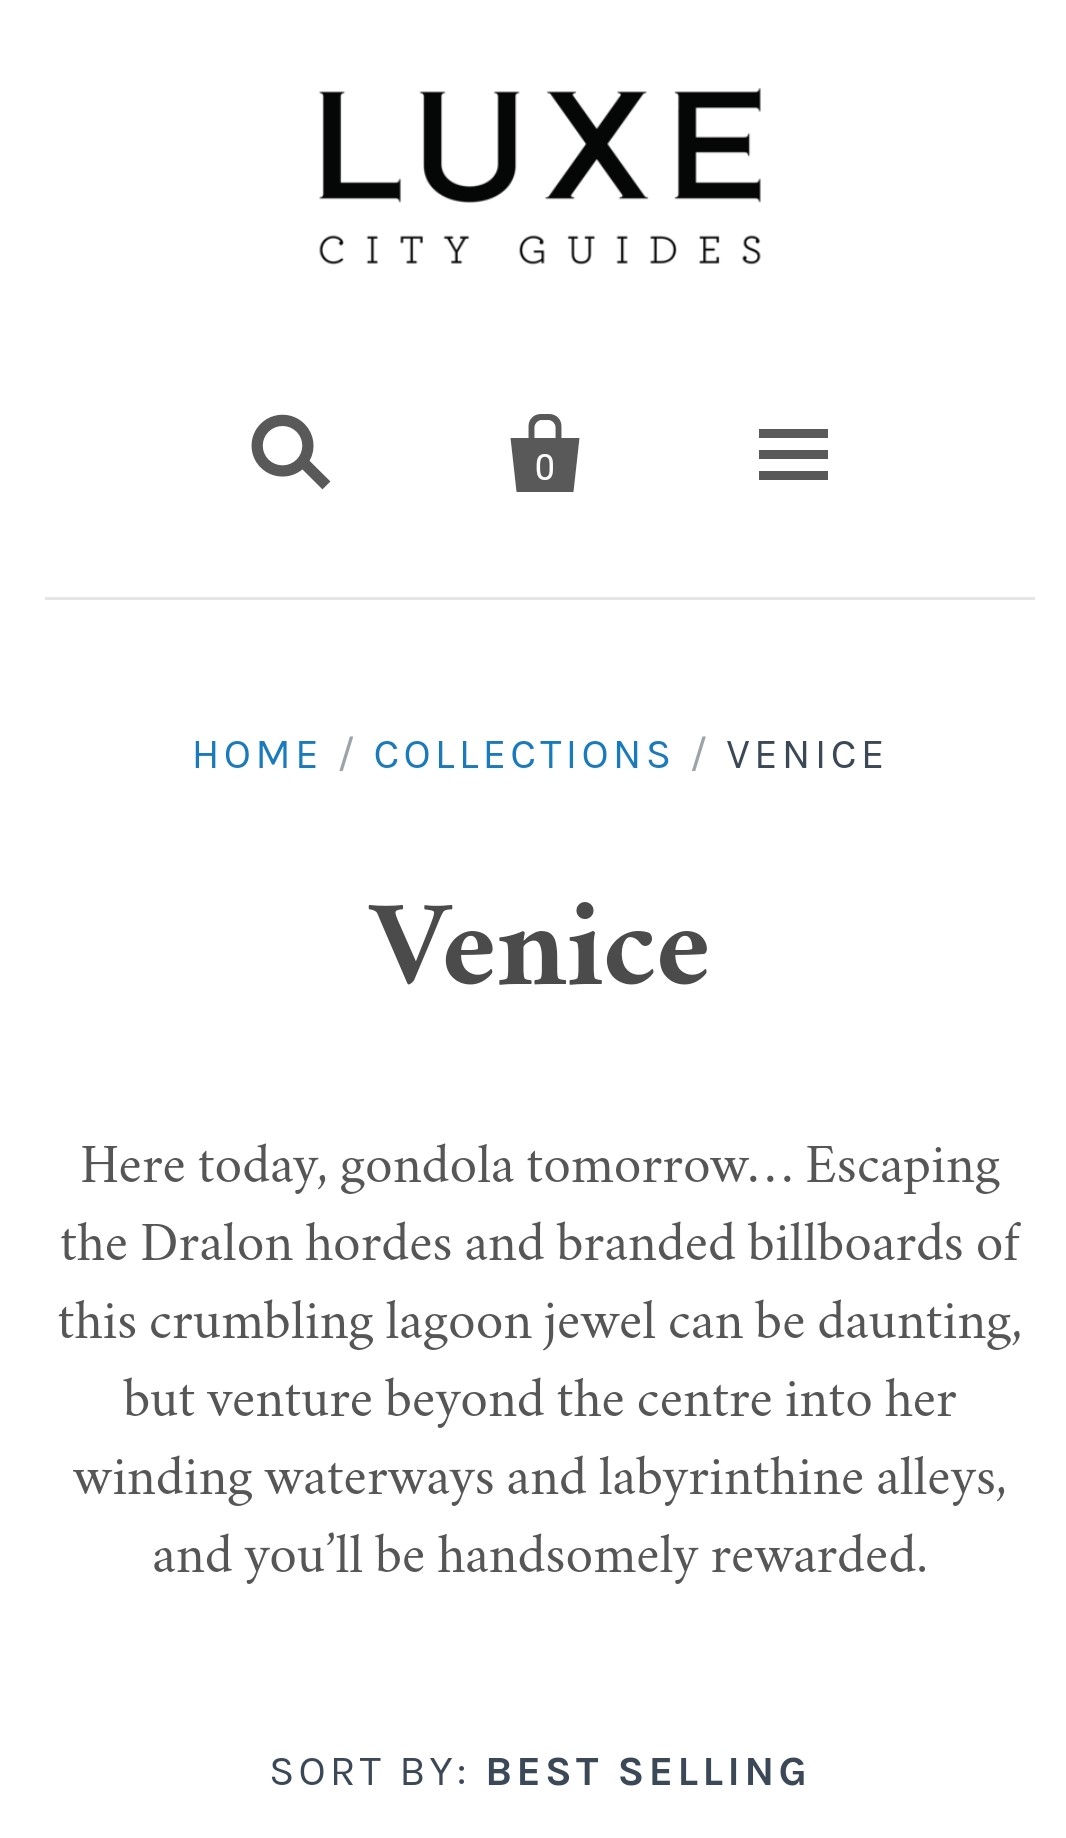 Luxe City Guides: Venice